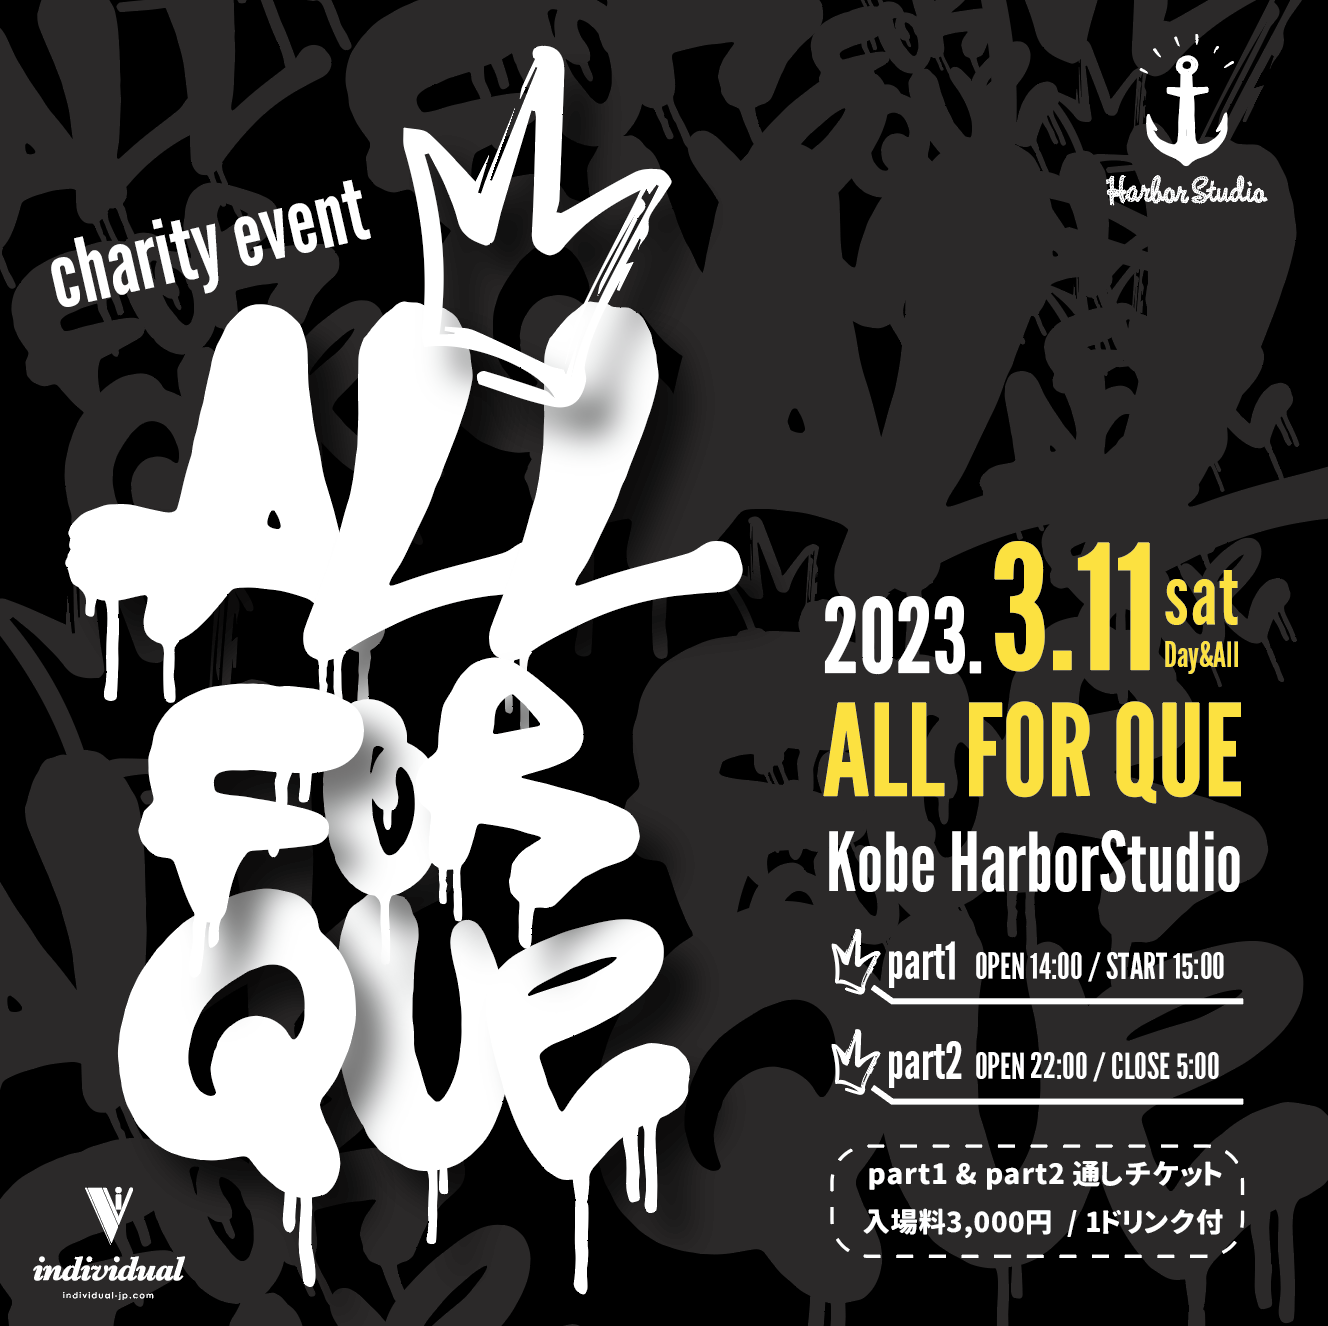 【ALL FOR QUE】 Day&All チャリティイベント